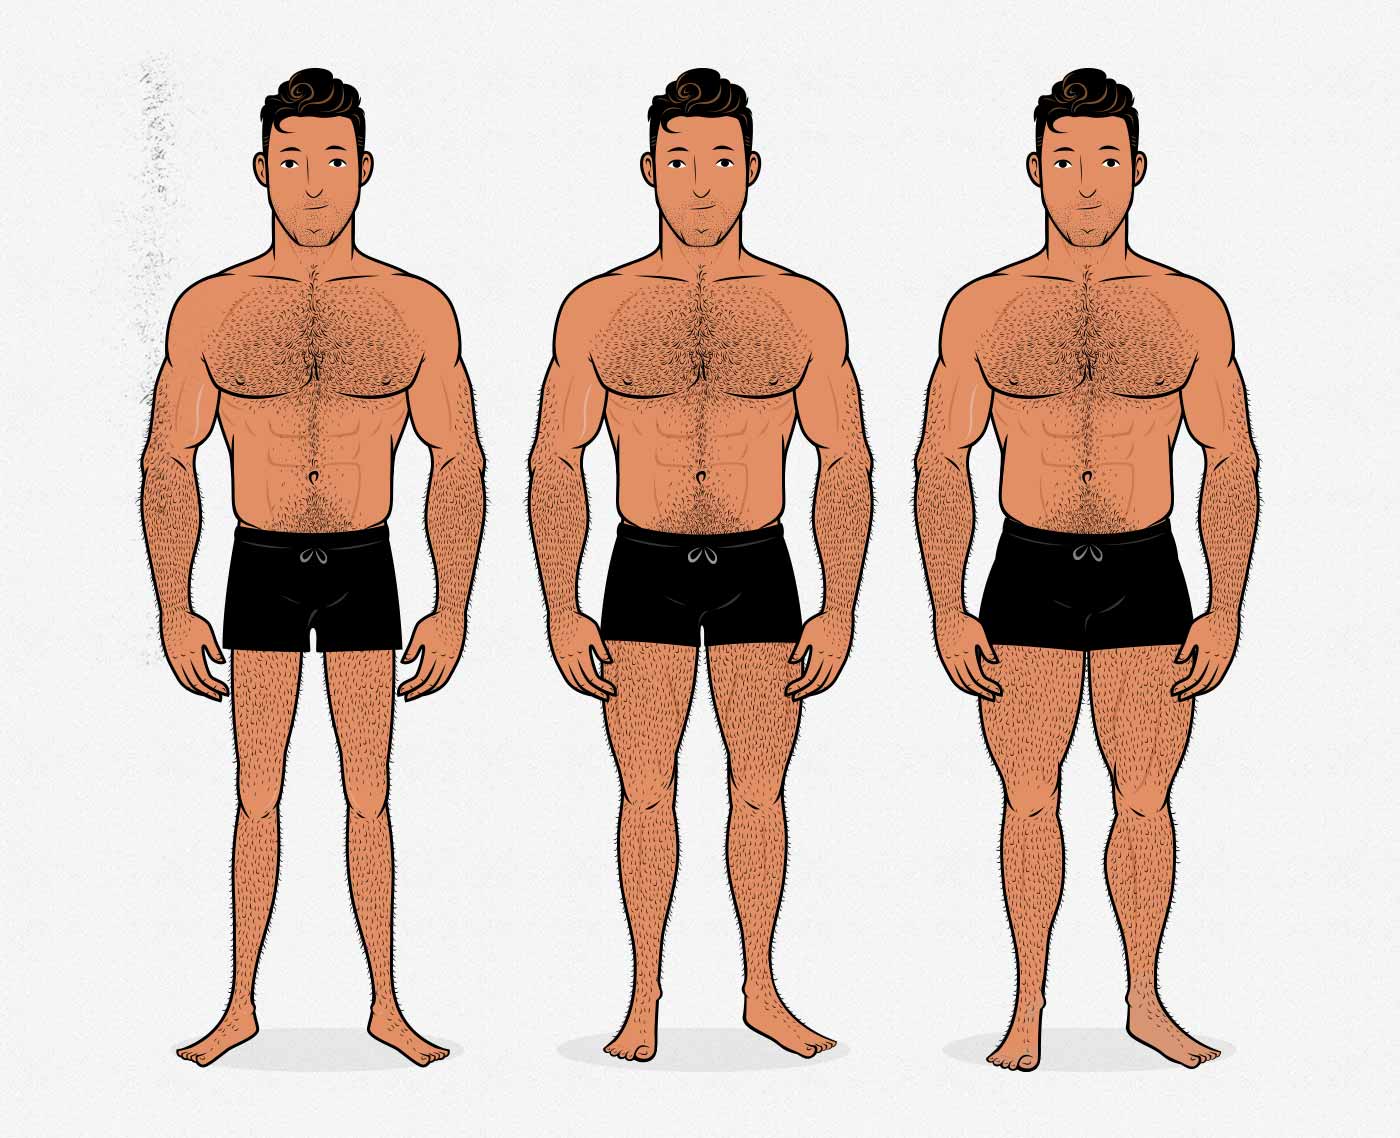 Illustration of men with different leg sizes and degrees of muscularity.